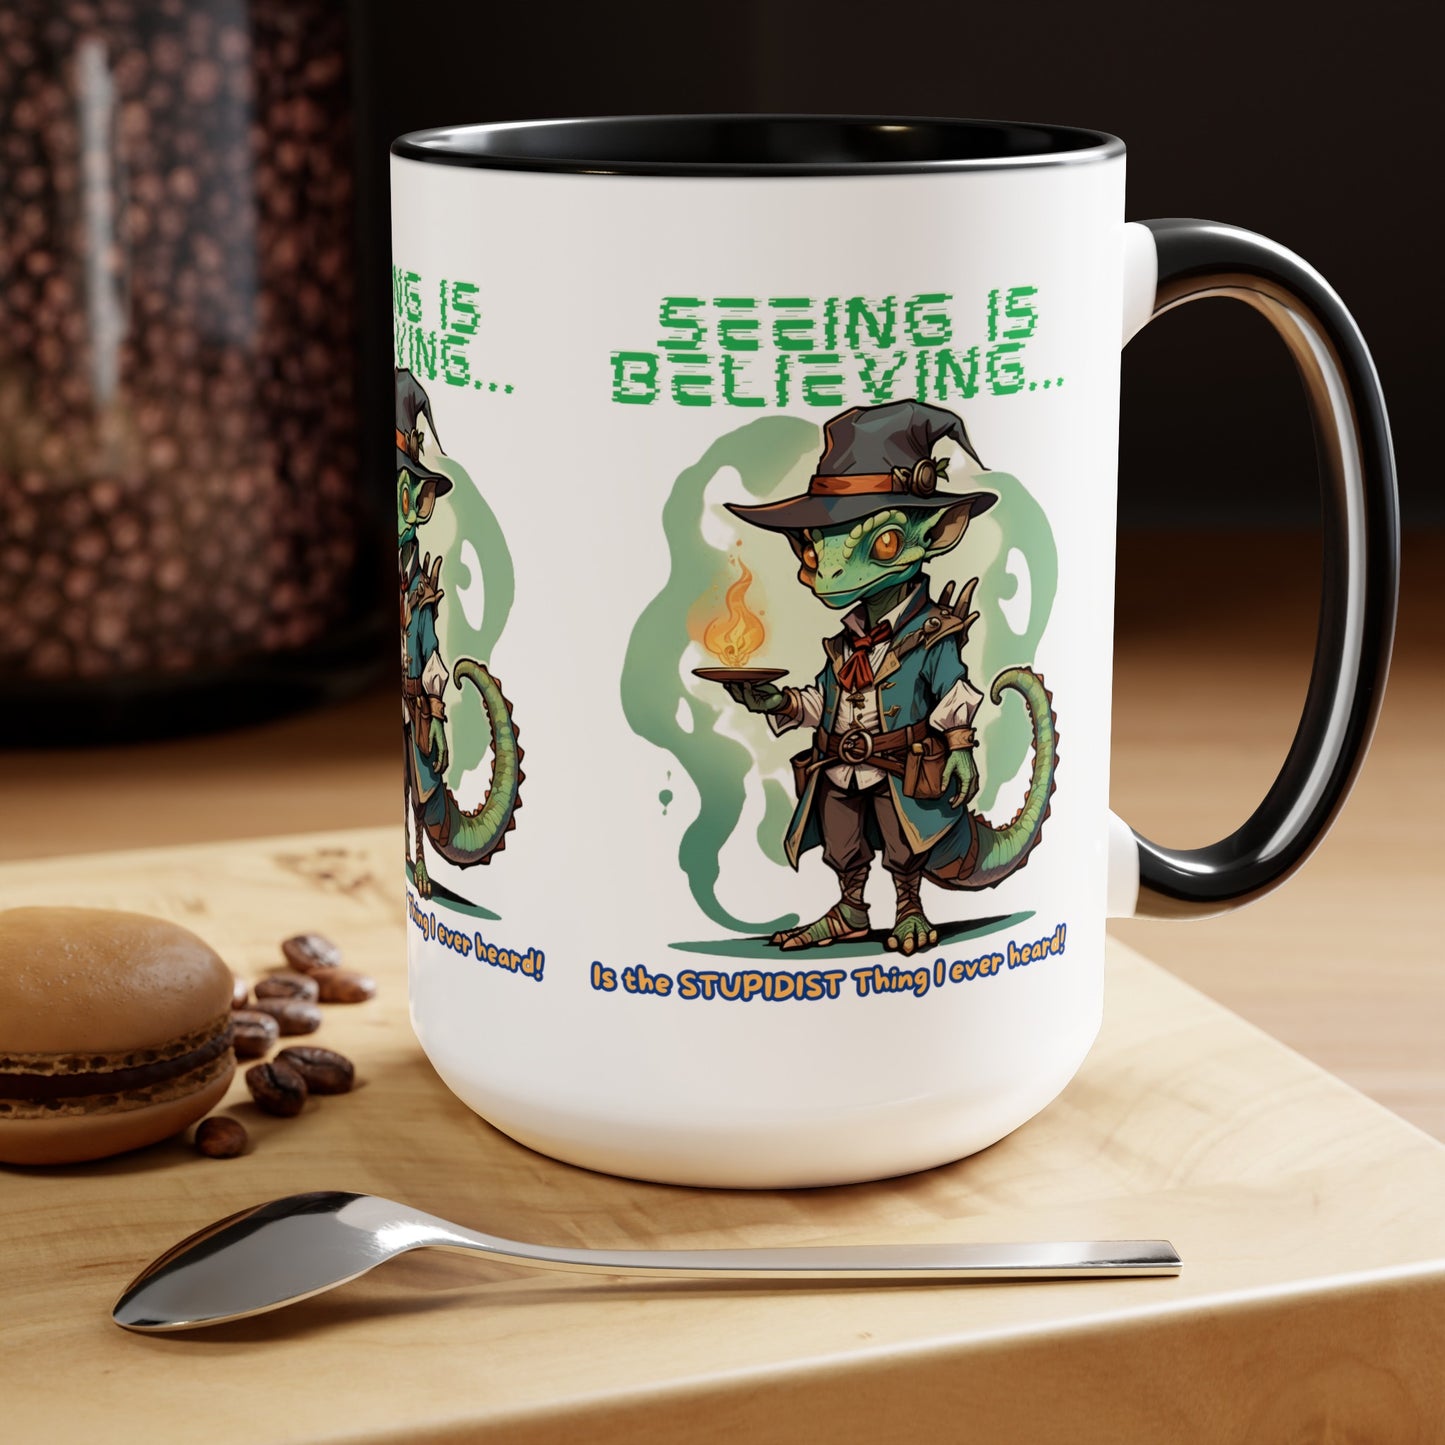 Seeing Is Believing Two-Tone Coffee Mugs, 15oz